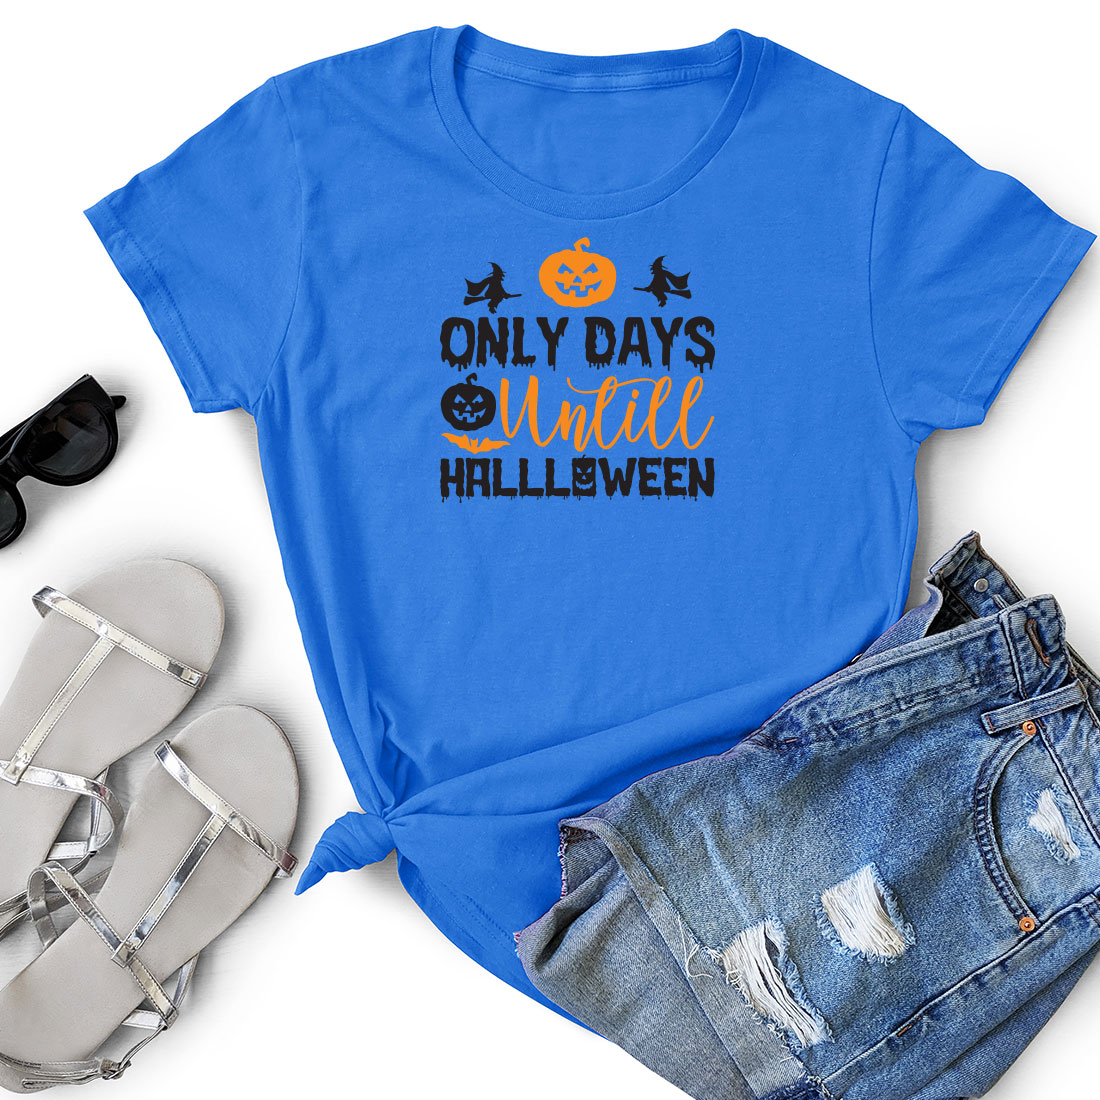 T - shirt that says only days until halloween.